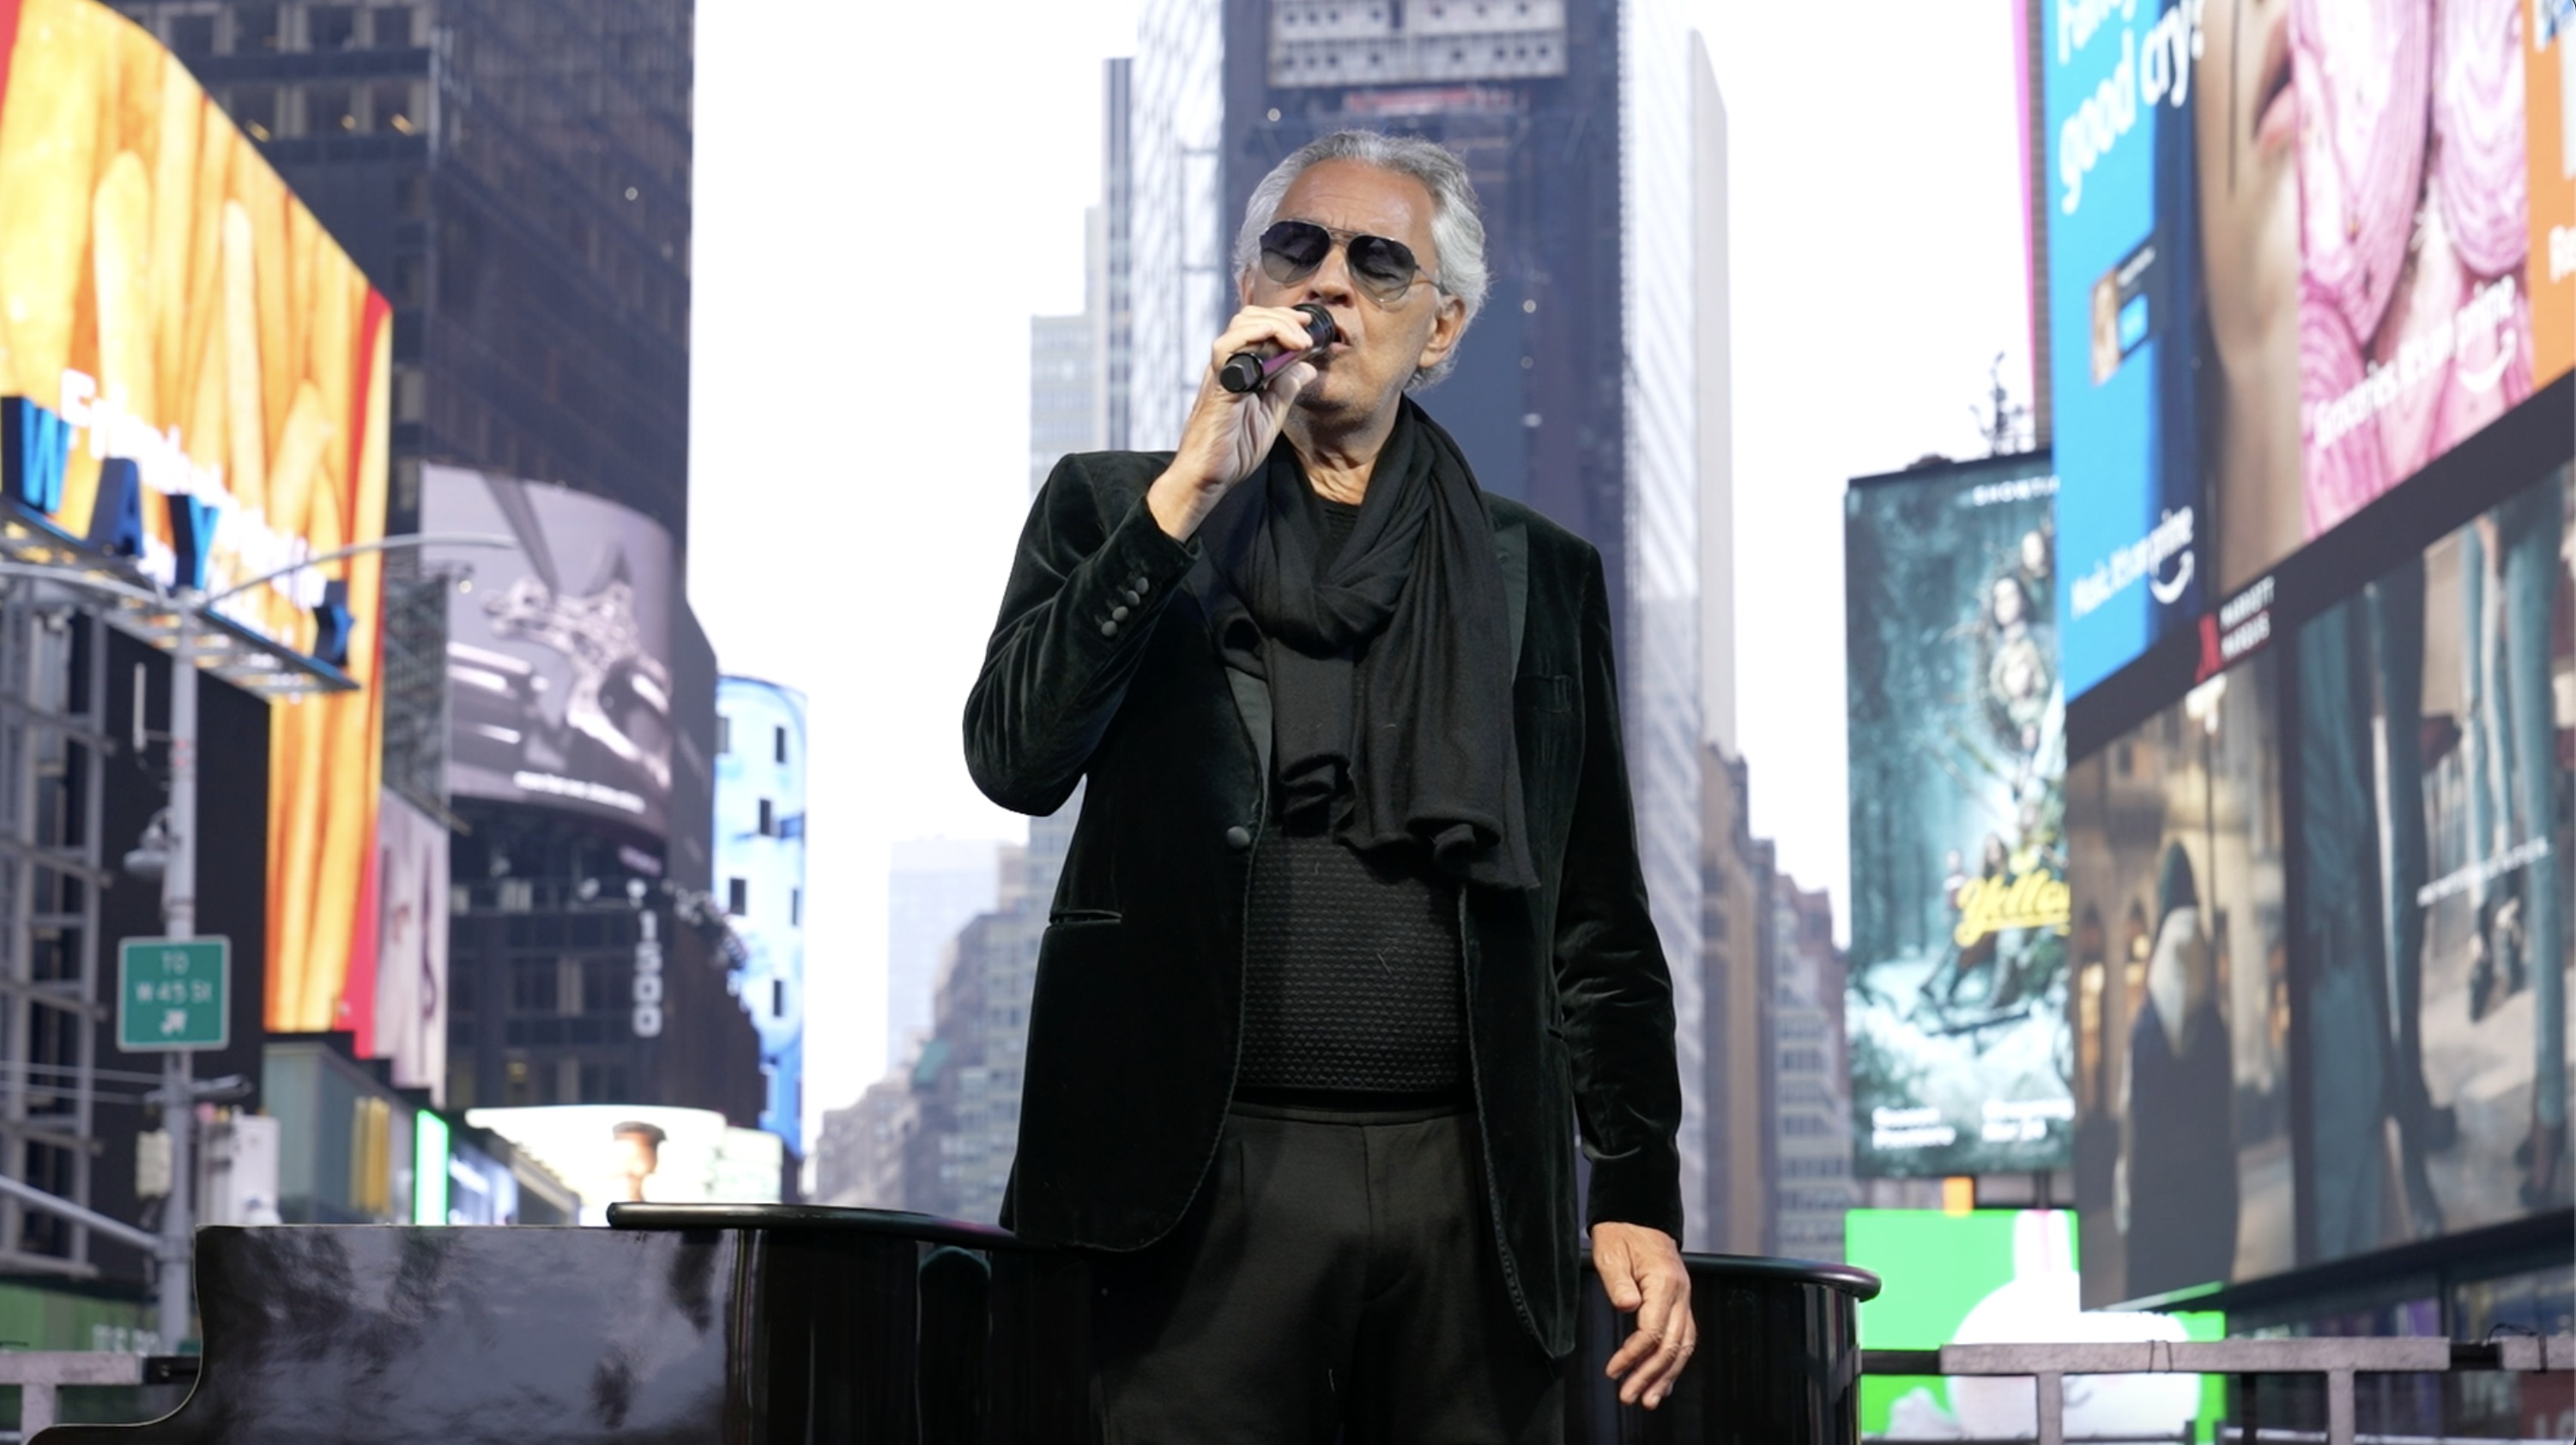 Andrea Bocelli Reflects on His Life in New Biopic 'The Music of